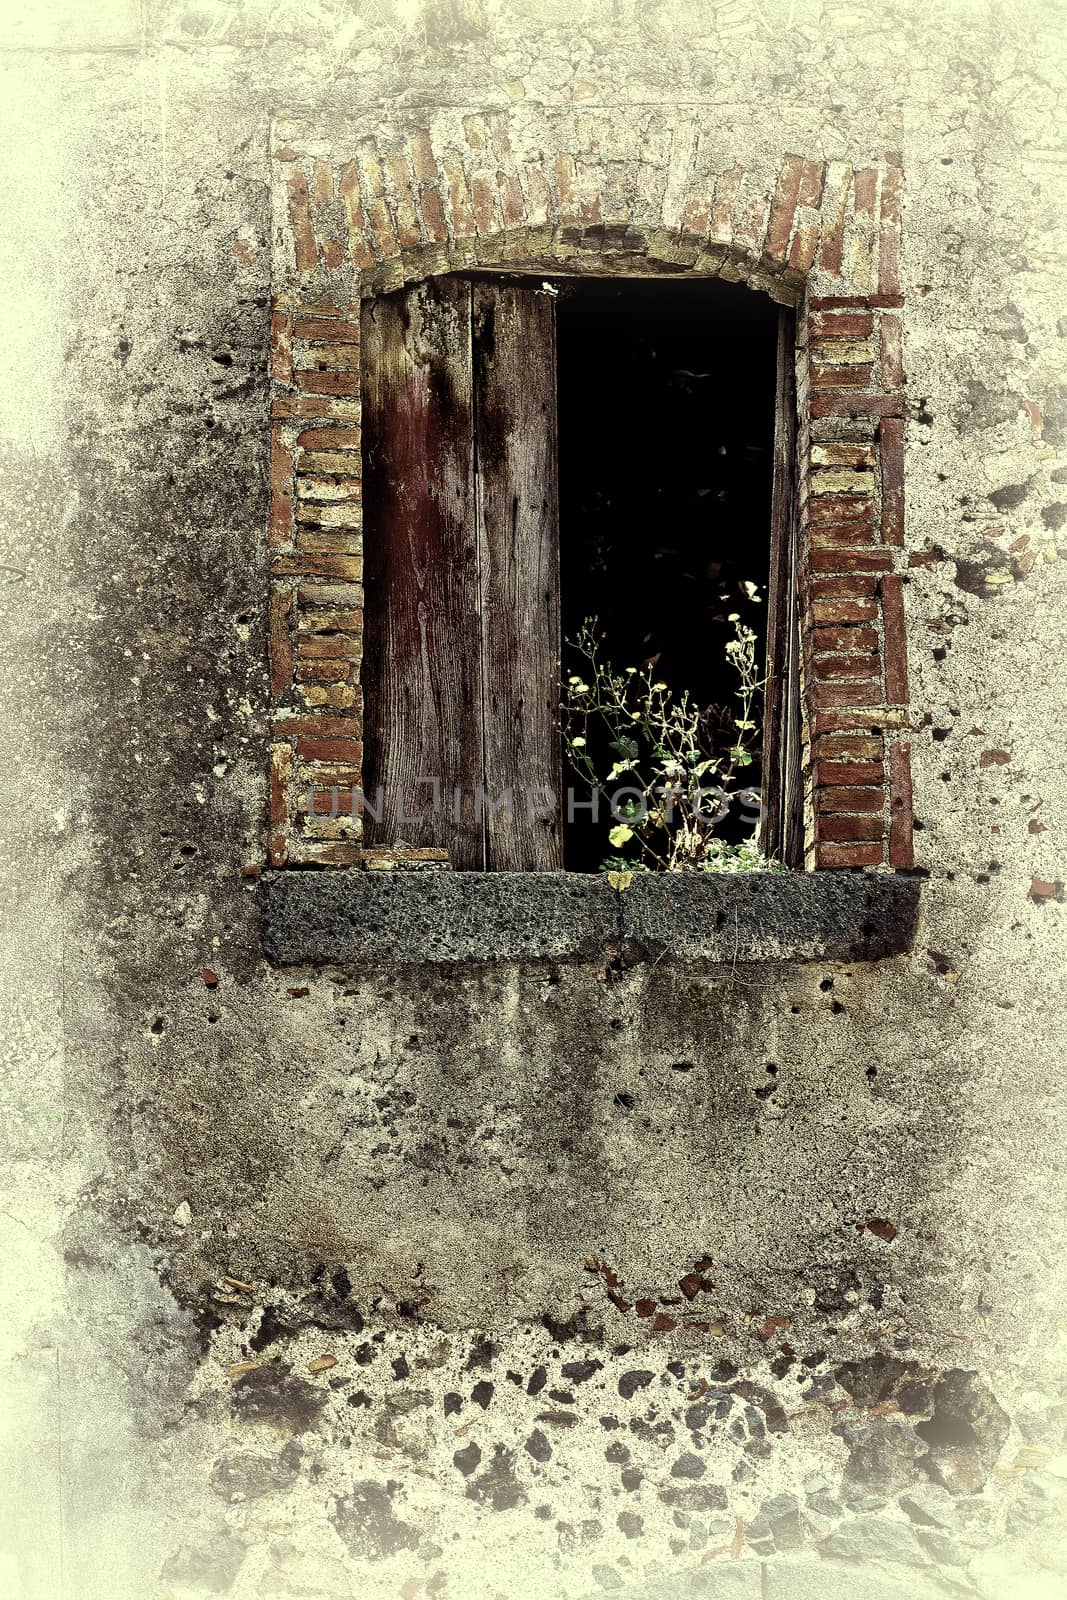 Window of Dilapidated Houses Decorated with Wild Plants in Sicily, Vintage Style Toned Picture